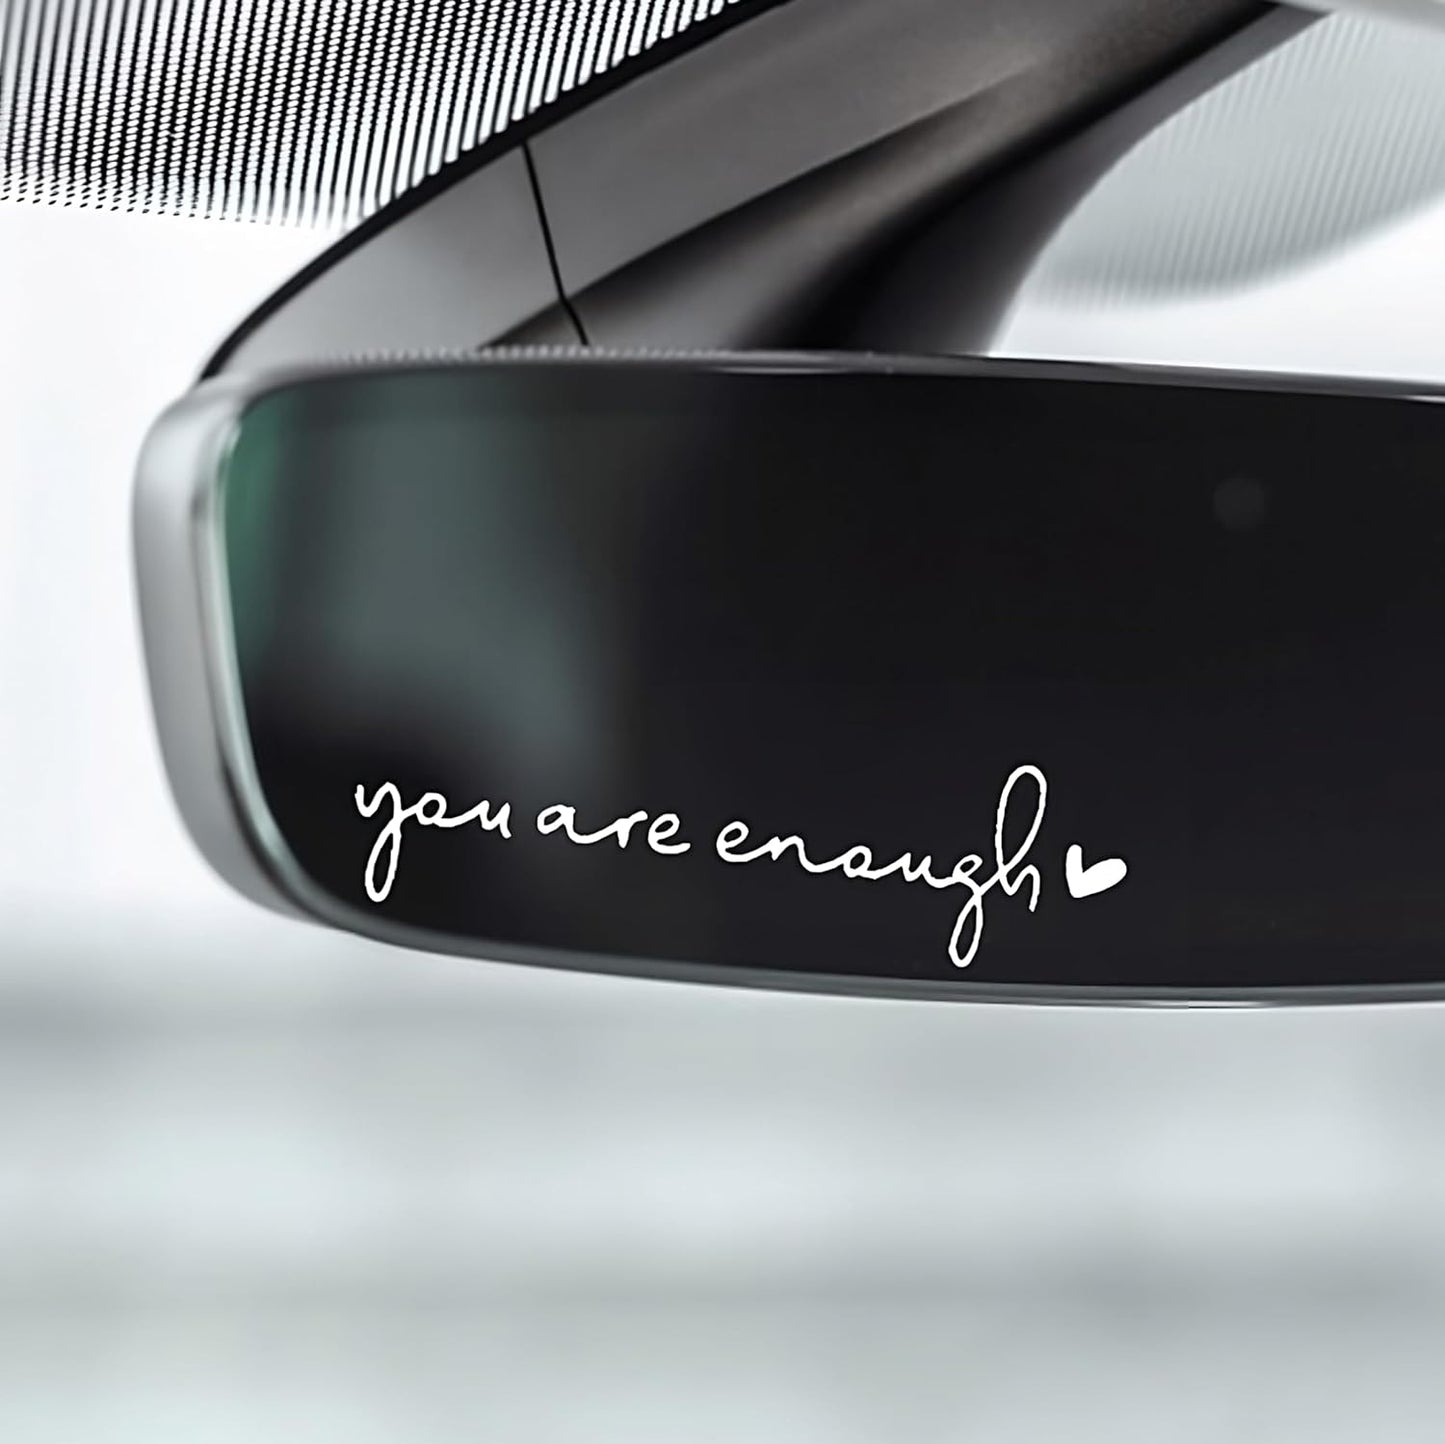 You are Enough Rearview Mirror Decal, Car Decals, Car Stickers, Car Stickers and Decals, Car Window Decals for Vehicles, Car Decals for Women, Car Window Stickers, Car Stickers for Women